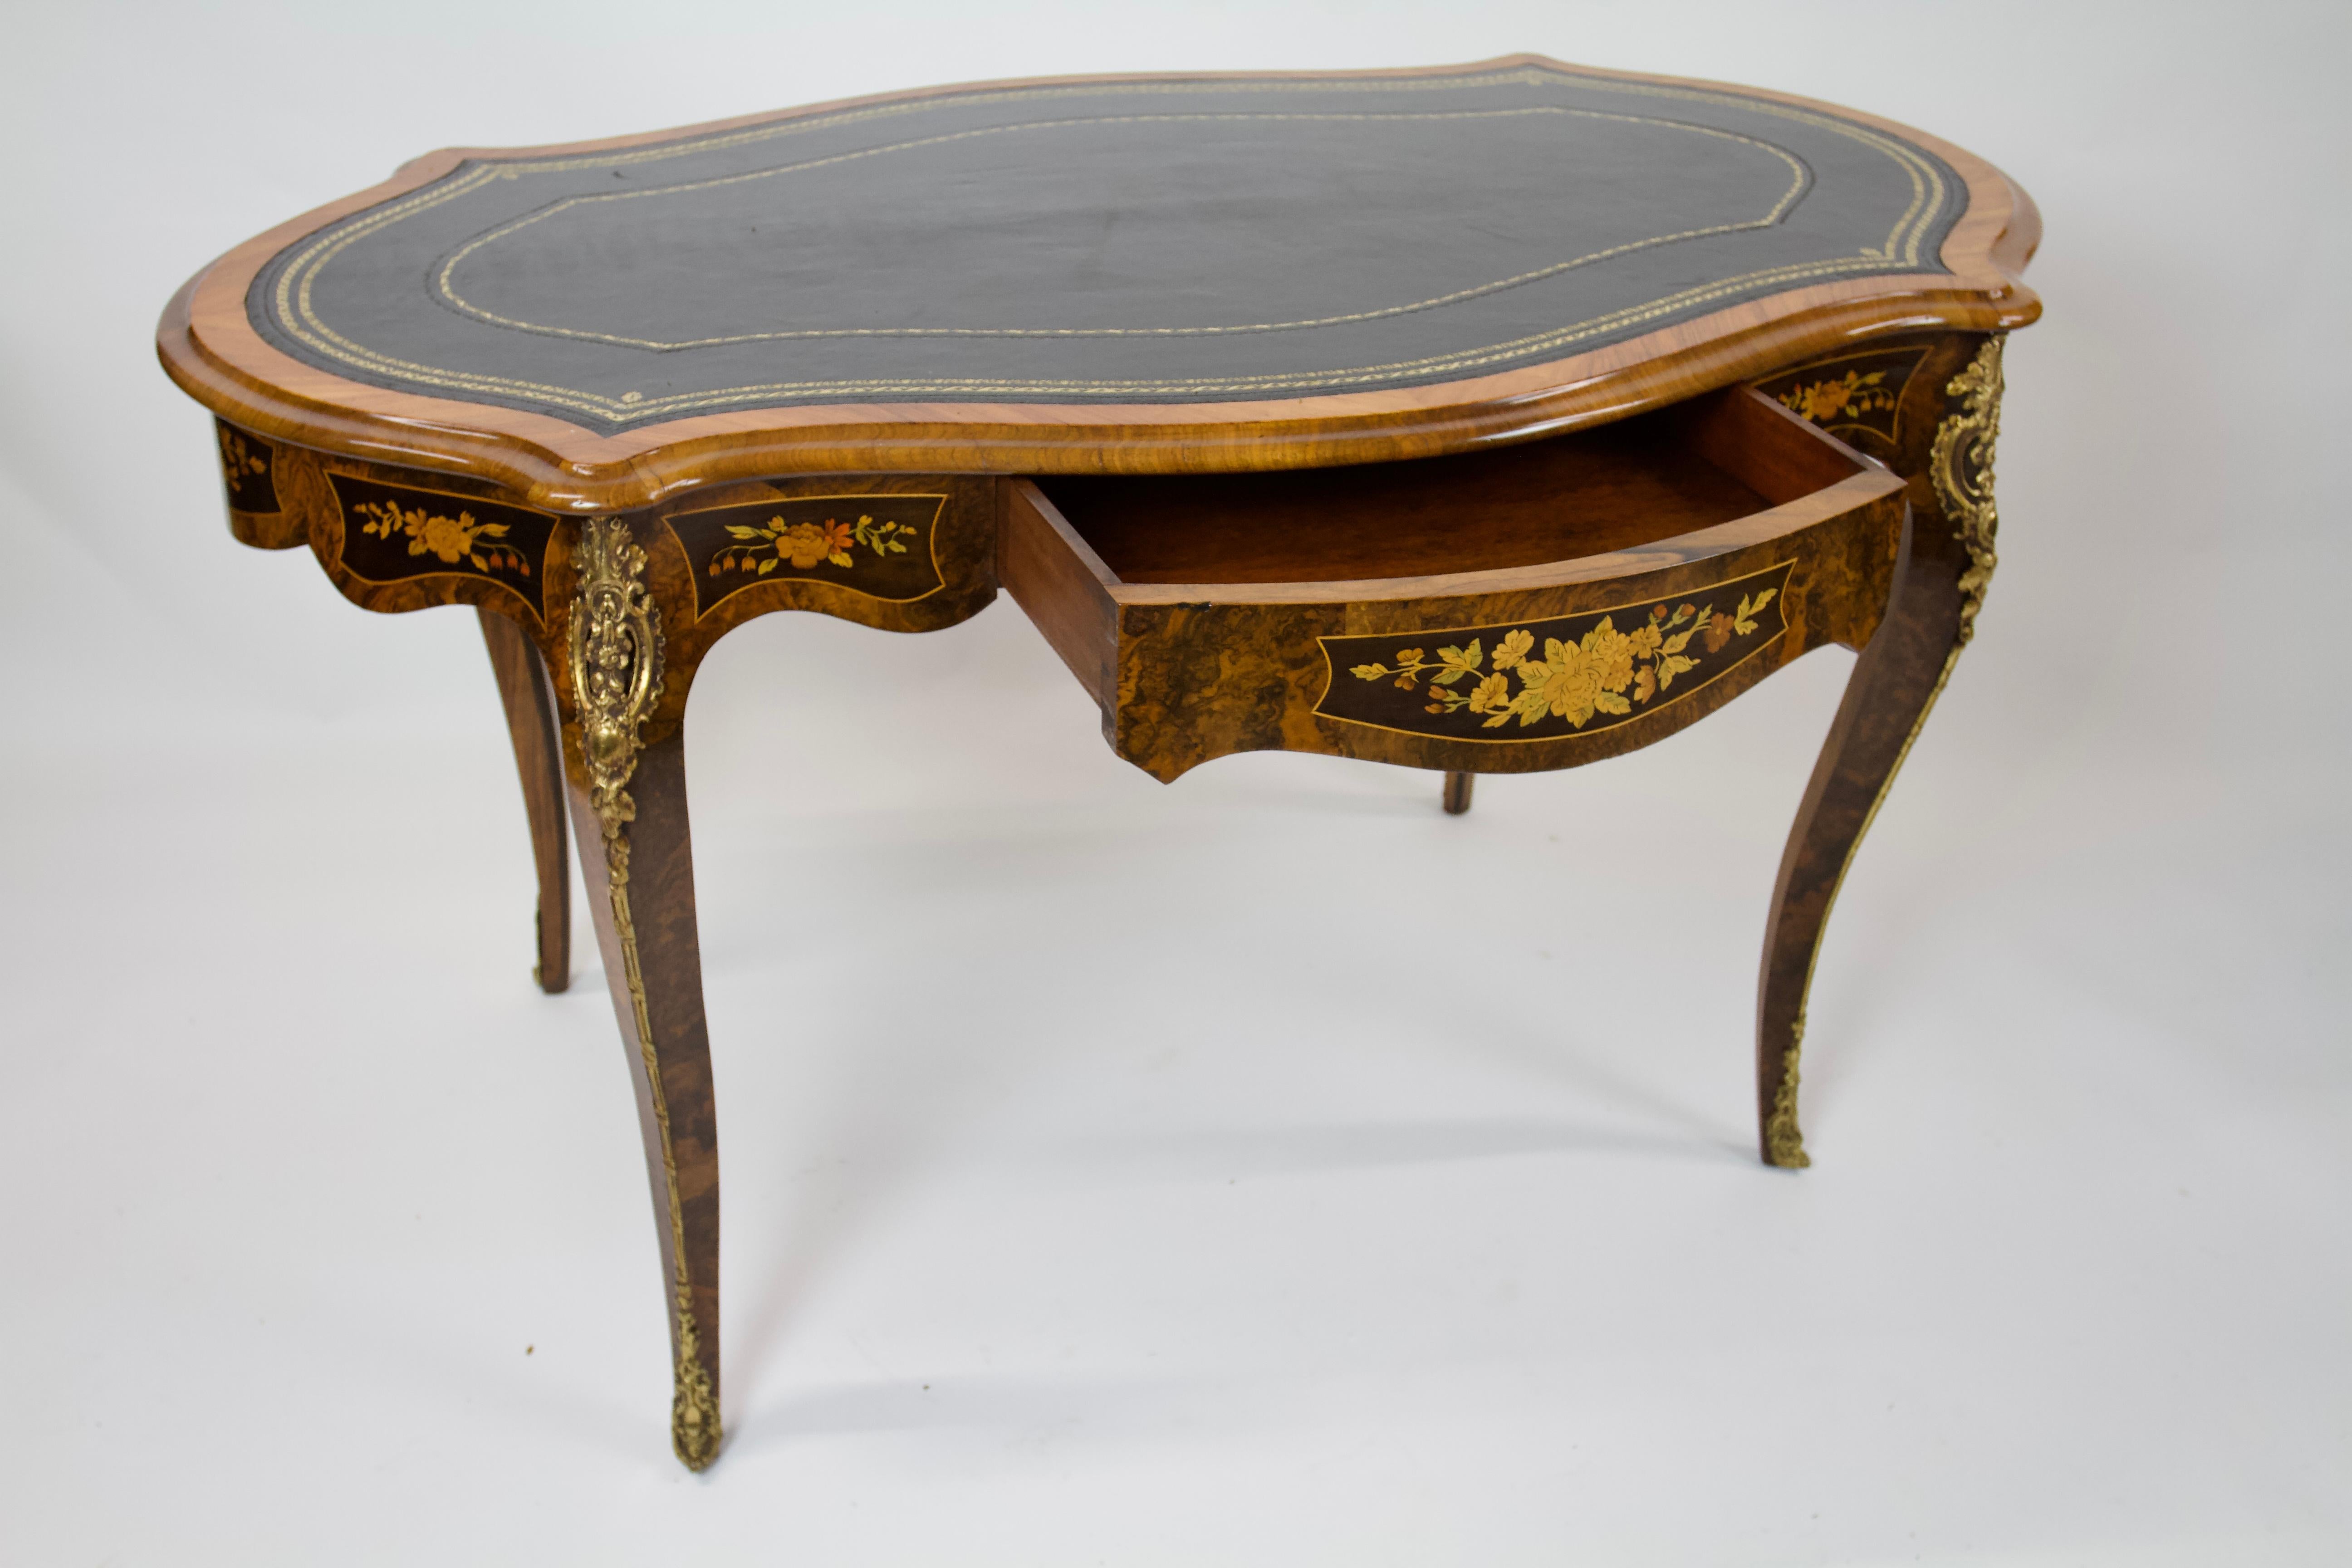 Fine C19TH  French Burr Walnut & Marquetry Bureau Plat /Writing Table
Black Leather inset top, gold tooling decoration, 
with Walnut cross banding. thumb mould edge.
Shaped Burr Walnut Frieze, with Marquetry inlay panels
Single Drawer at front with